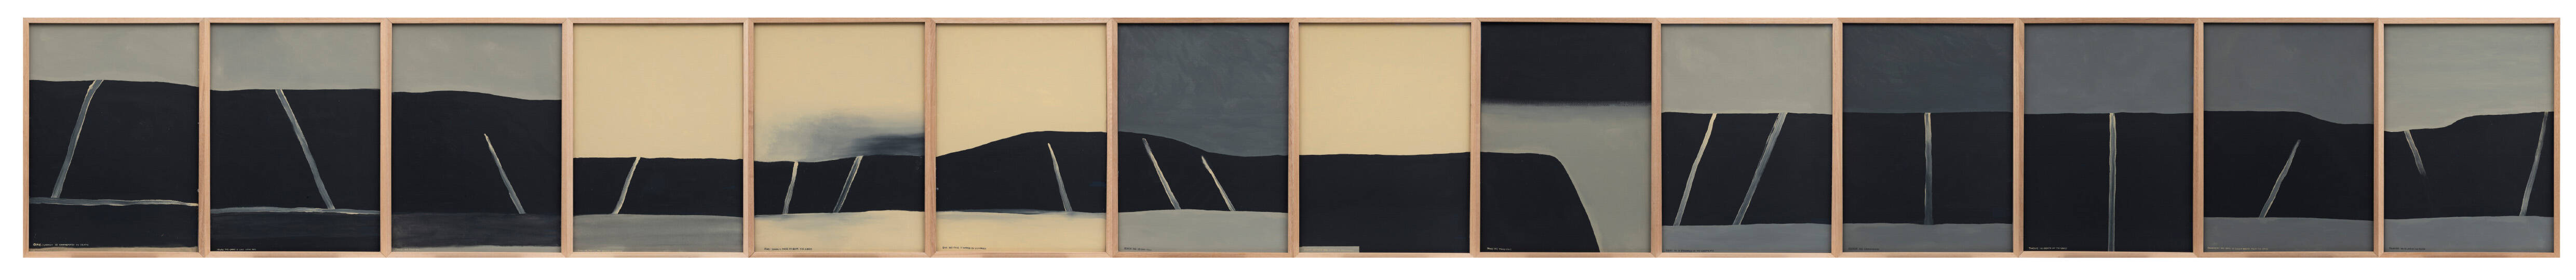 <p>Colin McCahon,&nbsp;<em>The Fourteen Stations of the Cross</em>, 1966, synthetic polymer paint on 14 sheets of paper on cardboard, Auckland Art Gallery Toi o Tāmaki, gift of the artist, 1981</p>
